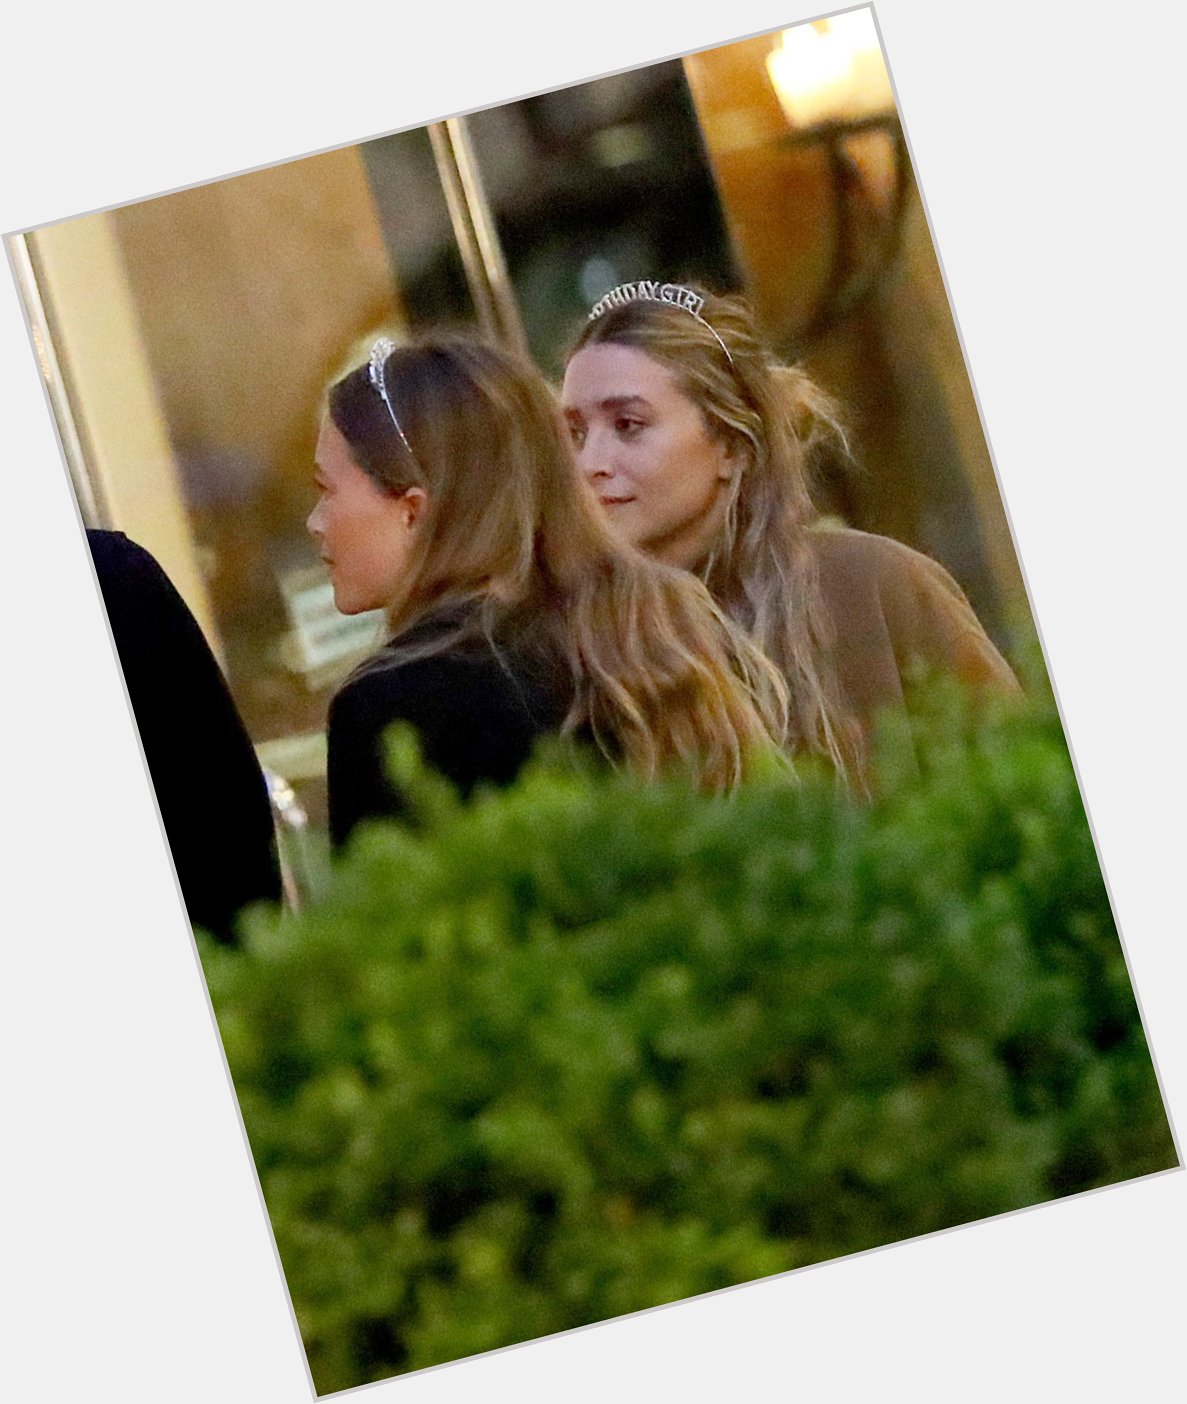 Happy Birthday to the coolest twins that ever were - Ashley and Mary Kate Olsen 